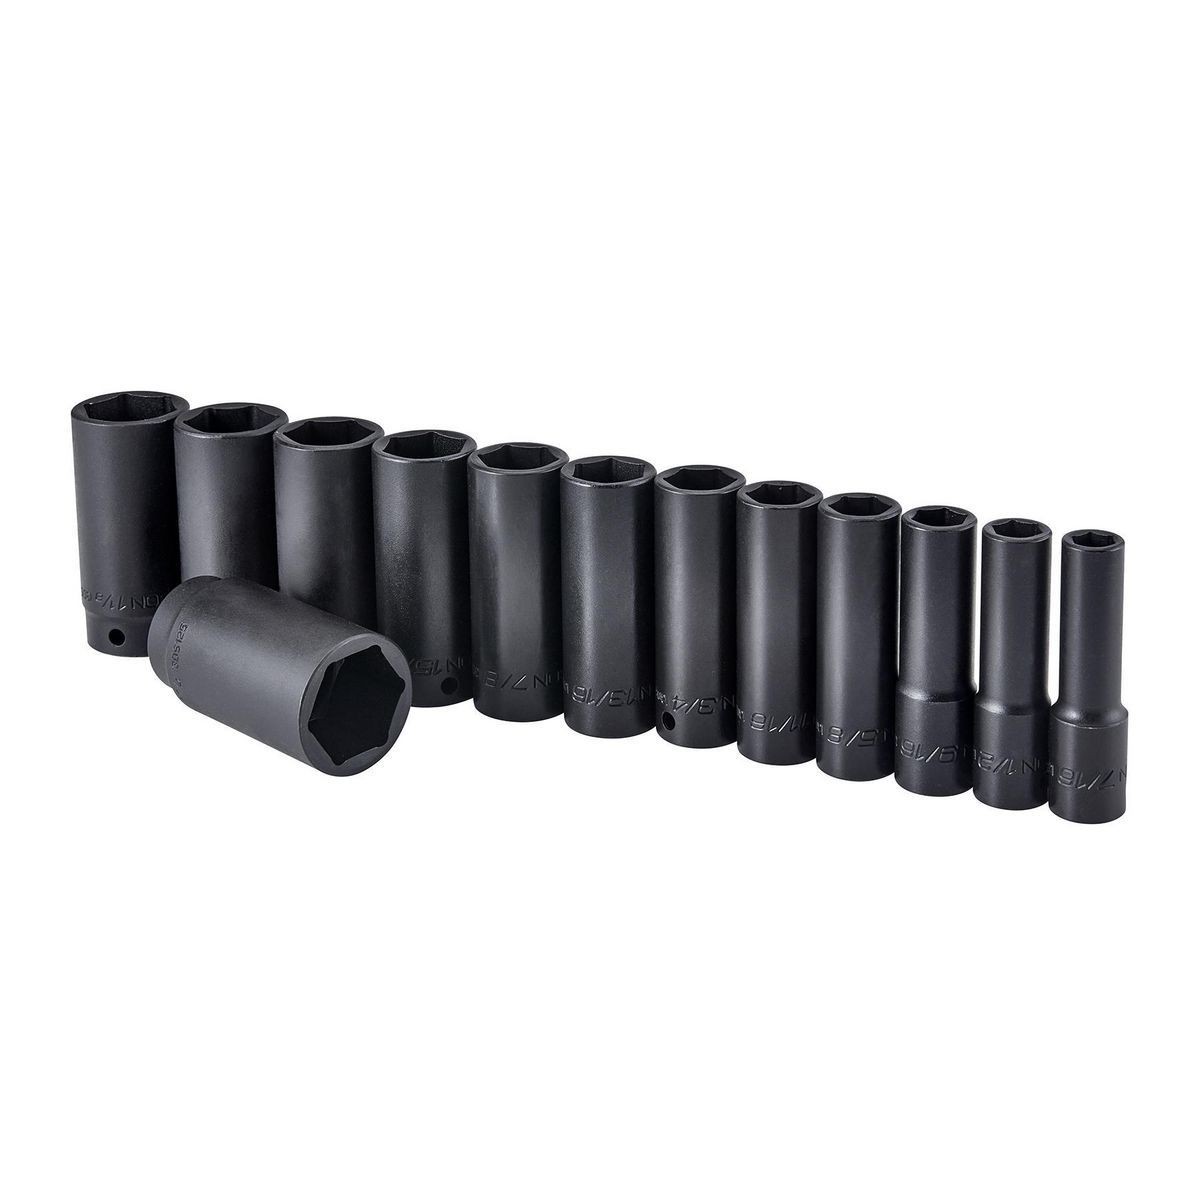 ICON 1/2 in.  Drive SAE Professional Deep Impact Socket Set, 13 Piece